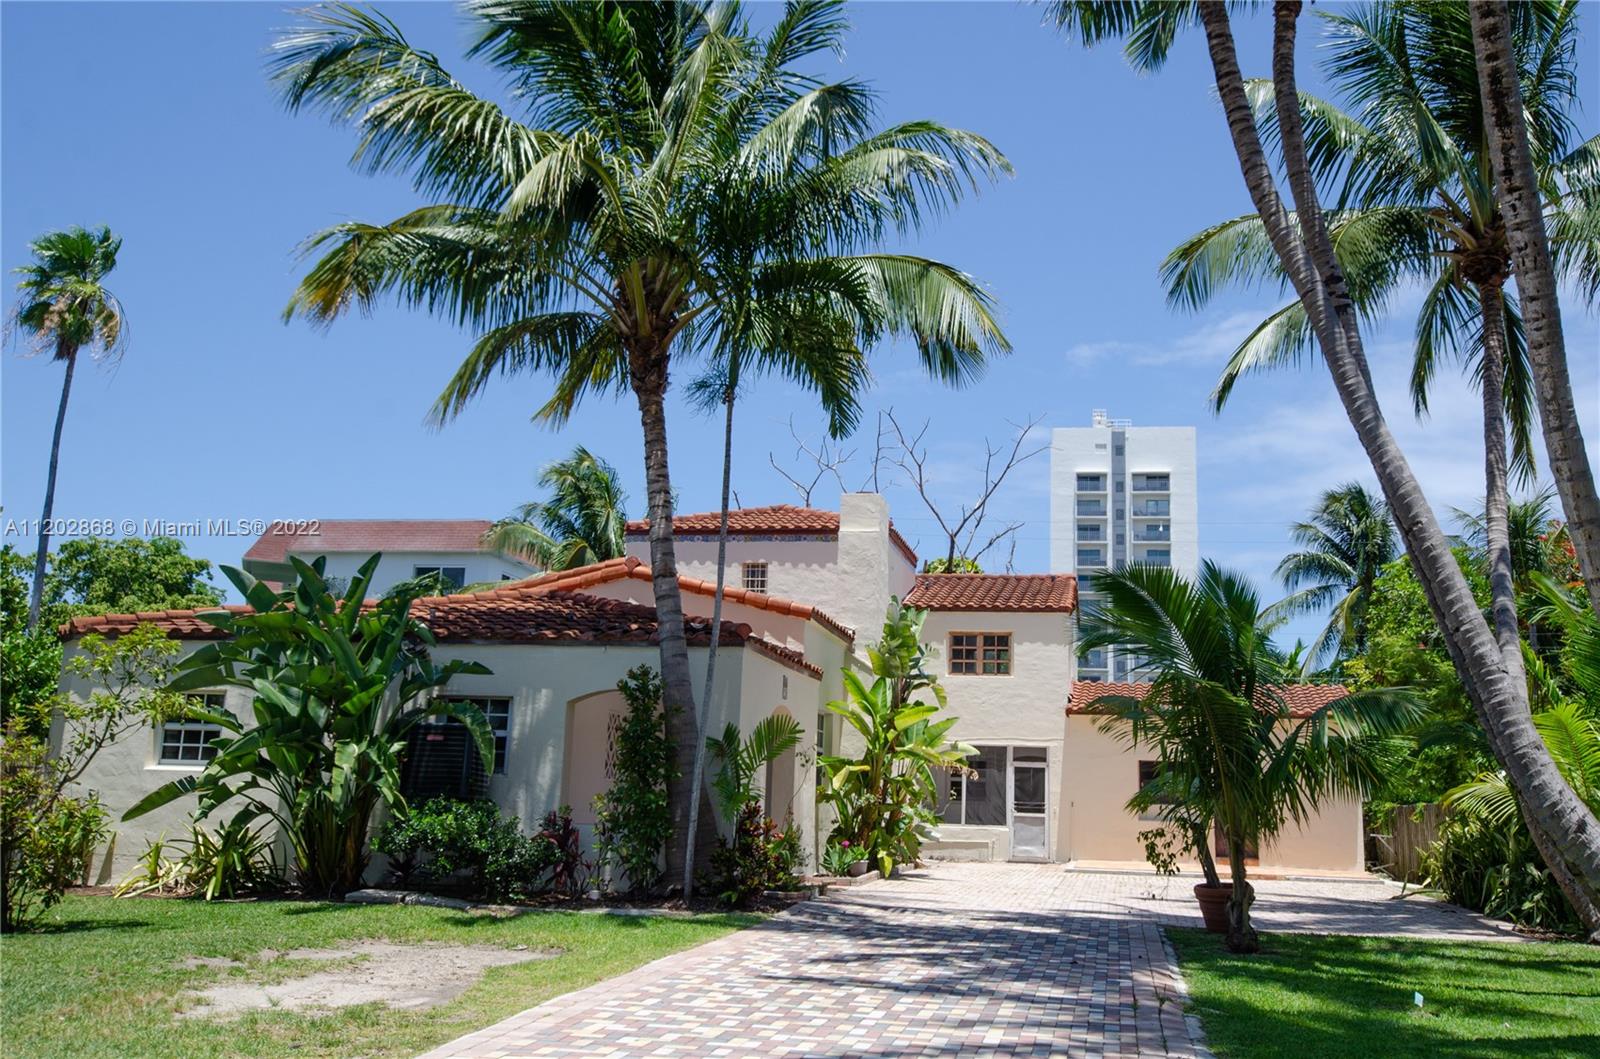 Amazing opportunity to own in Miami Beach! One of the most sought-after residential properties in the Lincoln Road area is finally on the market. This 7 bdr 4 bth two story-home with maid’s quarter sits on one of the largest residential lots in the area at 14,960 sq ft. with private gated entry surrounded by beautiful tropical landscaping and plenty of room for a pool. With a full rehab, you can make this your tropical oasis. This hidden gem is located on a quiet cul-de-sac street a couple blocks away from Lincoln Road, shops, restaurants, Pride Park and the Convention Center. Walkable distance to Trader Joe's and Publix & only a short bike ride to the beautiful beaches & Ocean Drive. Bring offers property is priced to sell and will not last! Showings by appointments only, 24 hrs notice.